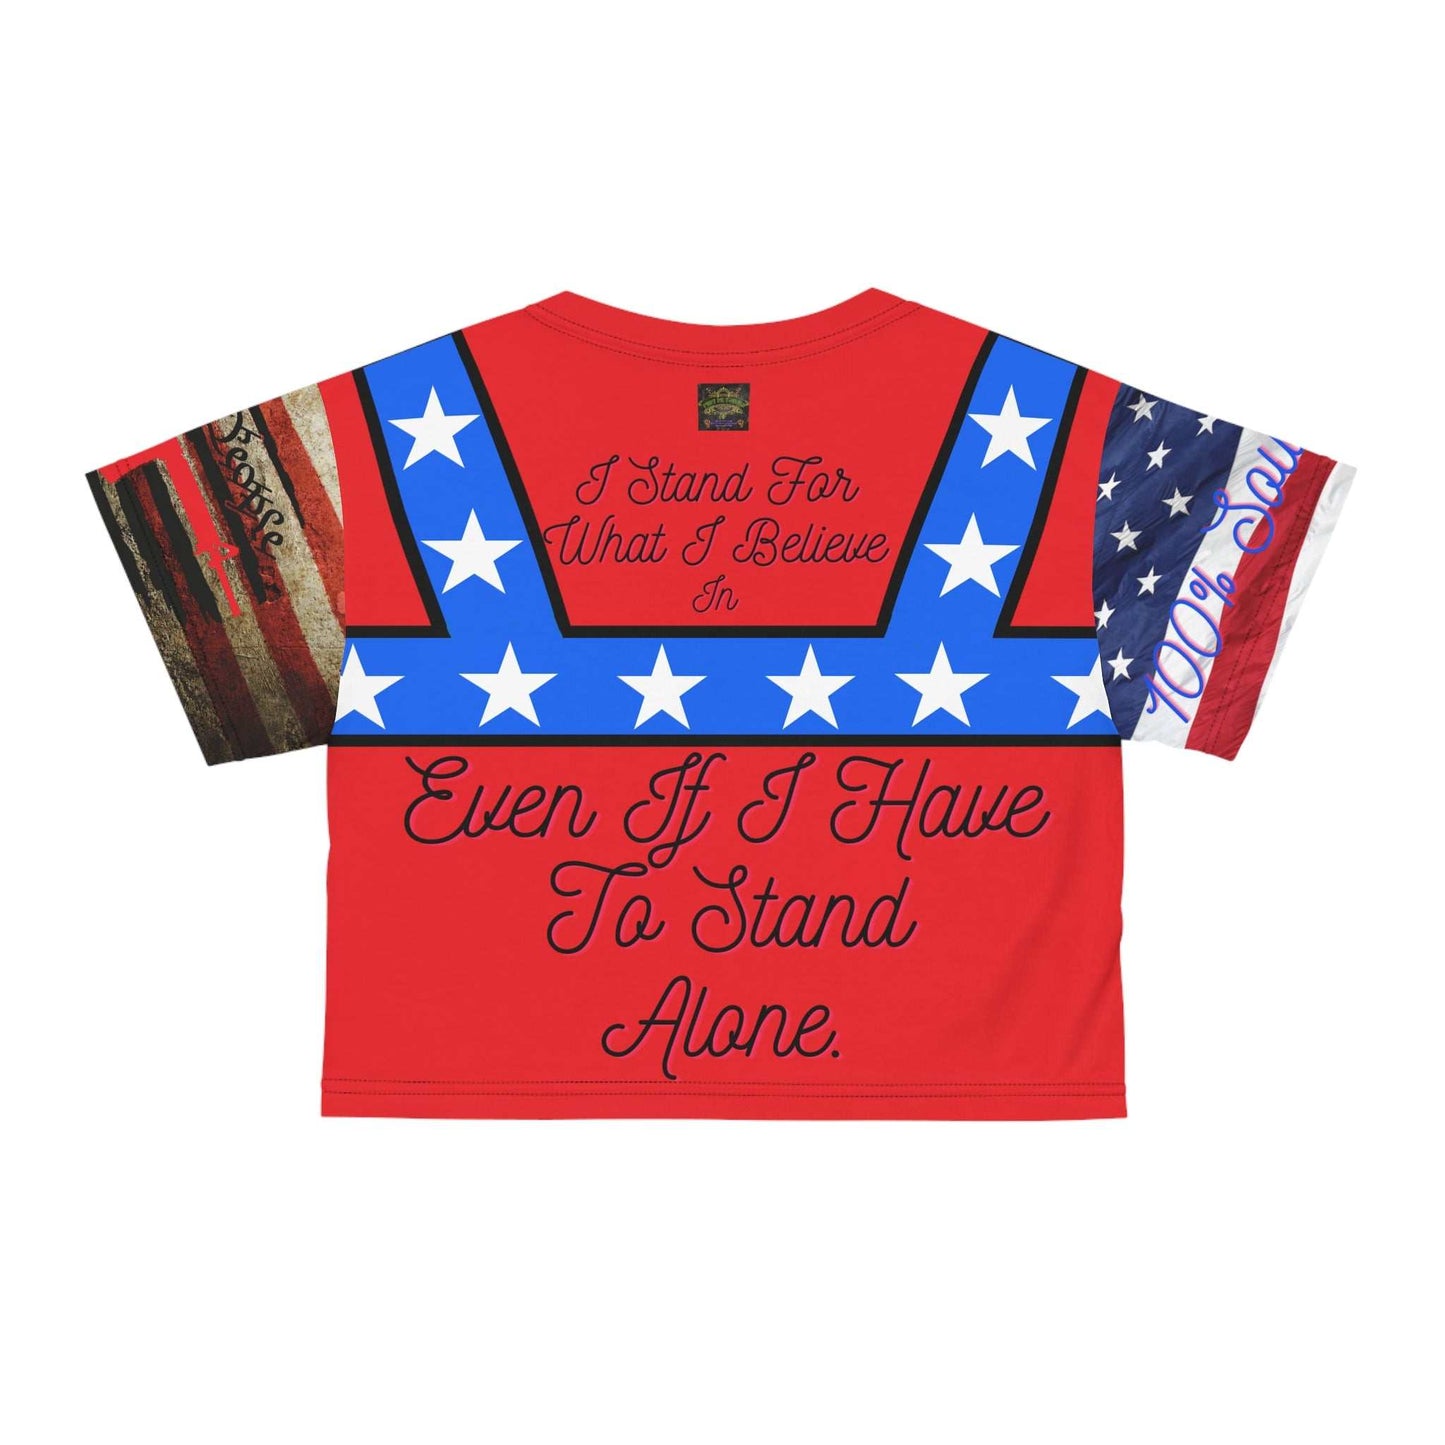 I stand for what I believe in even if I have to stand alone-Gildan SofPatriotic shirt-Custom Gildan Soft-style